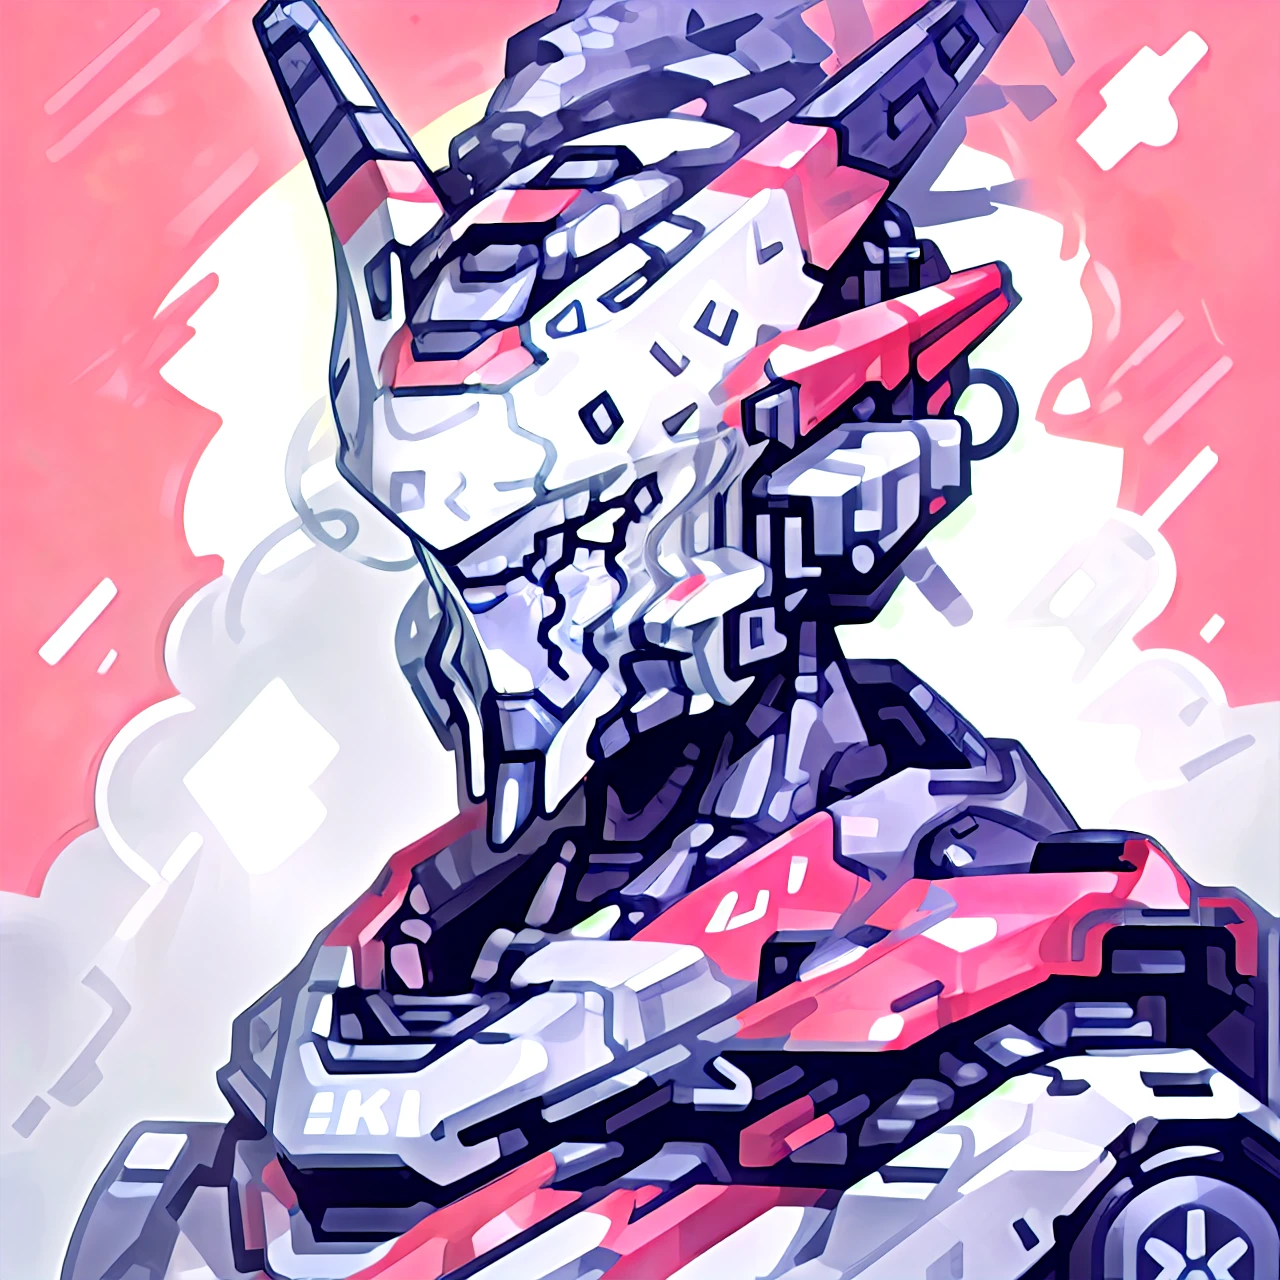 Mecha, android, mecha, plain pink background, monochrome character, grayscale character, detailed, worried face, editorial illustration, 4k, non-binary, androgynous, masked